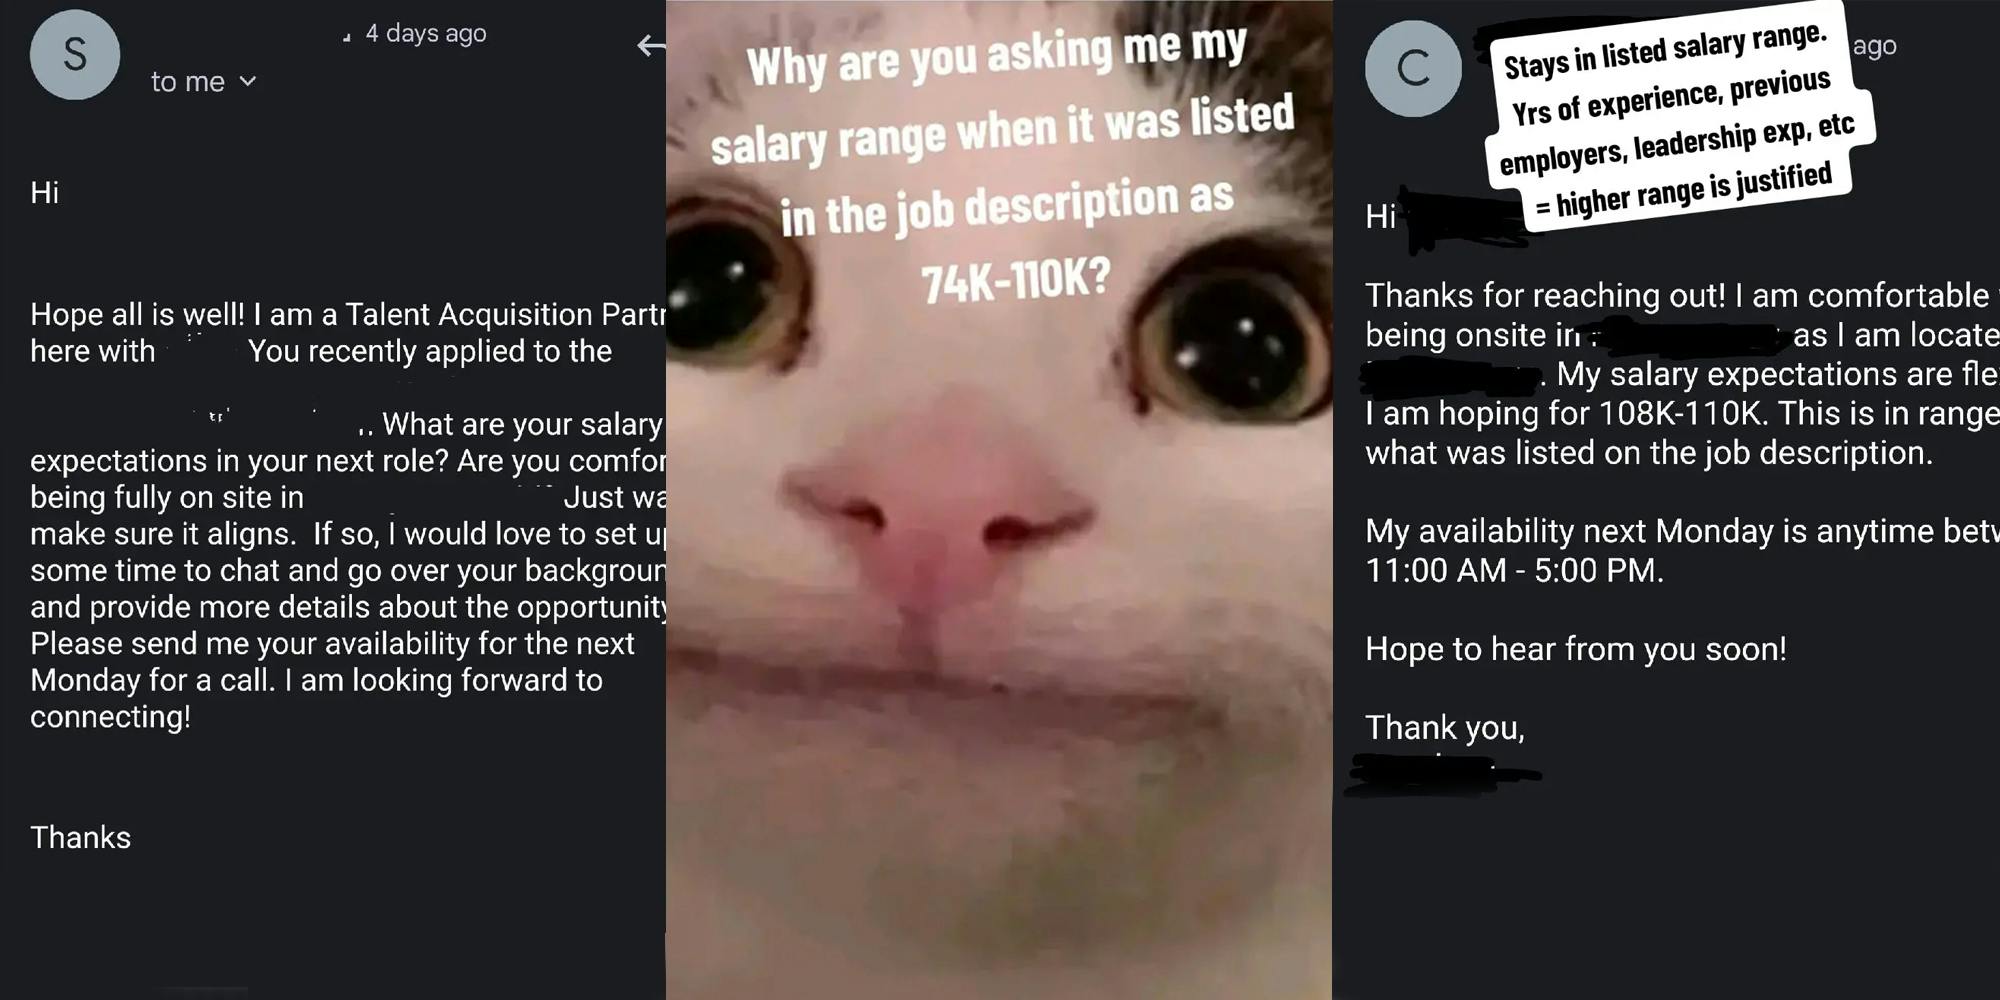 email with message "HI Hope all is well! I am a Talent Acquisition... here with blank. Ypu recently applied to the blank. What are your salary expectations..." (l) cat meme with caption "Why are you asking me my salary range when it was listed in the job description as 74k-110k? (c) email with caption "Stays in listed salary range. Yrs of experience, previous employers, leadership exp, etc = higher range is justified" Hi Thanks for reaching out! I am comfortable..." (r)